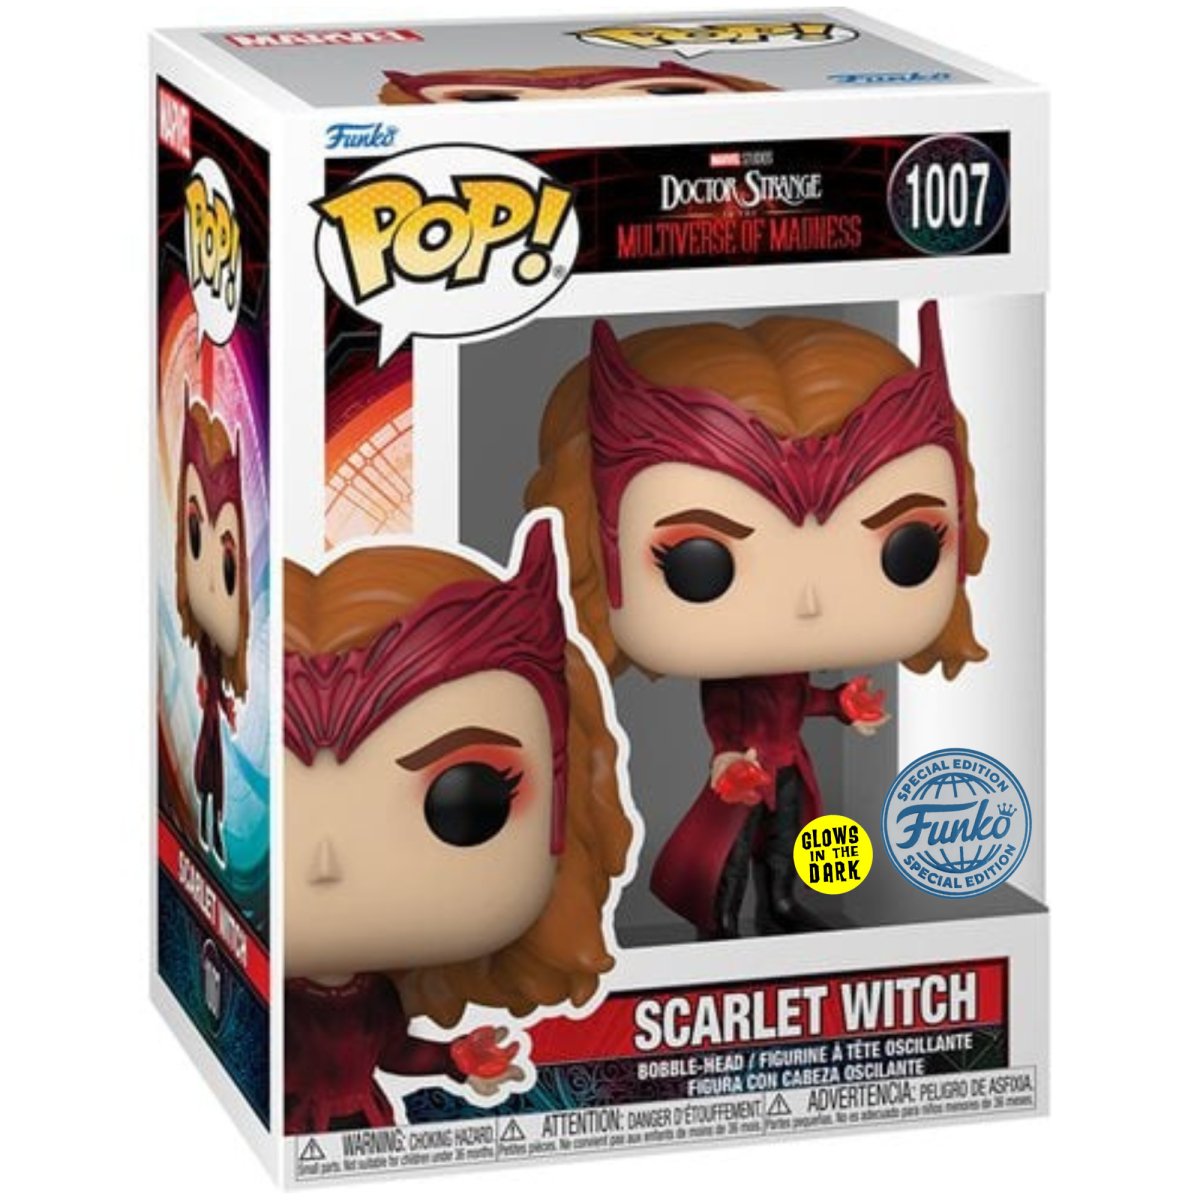 Doctor Strange in the Multiverse of Madness - Scarlet Witch (GITD Special Edition) #1007 - Funko Pop! Vinyl Marvel - Persona Toys